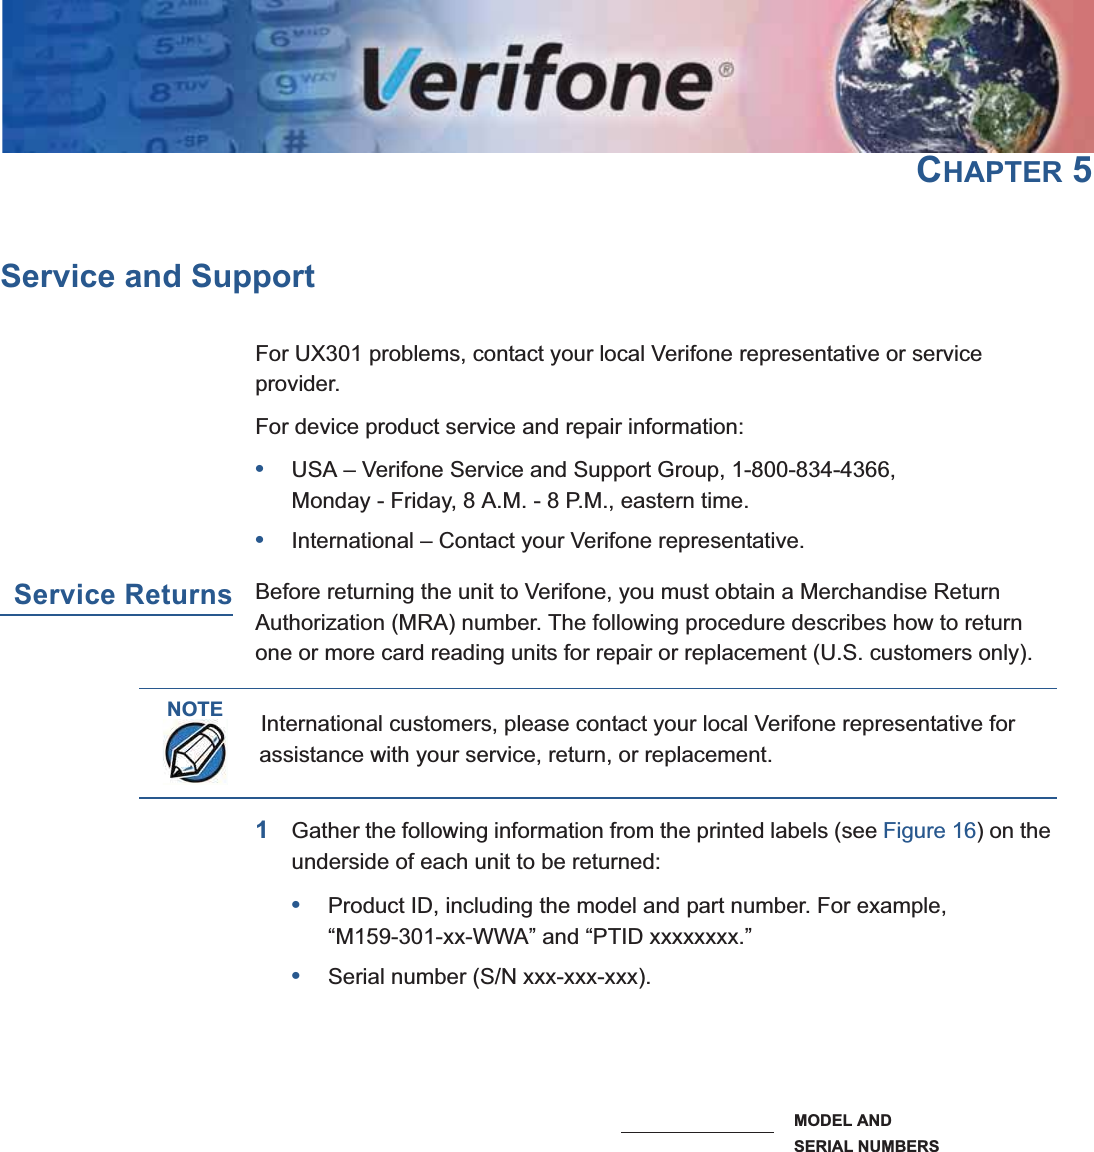 UX301 INSTALLATION GUIDE 31CHAPTER 5Service and SupportFor UX301 problems, contact your local Verifone representative or service provider.For device product service and repair information:•USA – Verifone Service and Support Group, 1-800-834-4366, Monday - Friday, 8 A.M. - 8 P.M., eastern time.•International – Contact your Verifone representative.Service ReturnsBefore returning the unit to Verifone, you must obtain a Merchandise Return Authorization (MRA) number. The following procedure describes how to return one or more card reading units for repair or replacement (U.S. customers only).1Gather the following information from the printed labels (see Figure 16) on the underside of each unit to be returned:•Product ID, including the model and part number. For example,“M159-301-xx-WWA” and “PTID xxxxxxxx.”•Serial number (S/N xxx-xxx-xxx).Figure 16 Information Labels on Unit Top2Within the United States, call Verifone toll-free at 1-800-834-4366.NOTEInternational customers, please contact your local Verifone representative for assistance with your service, return, or replacement.58)MAGE0LACEHOLDERSERIAL NUMBERSMODEL AND